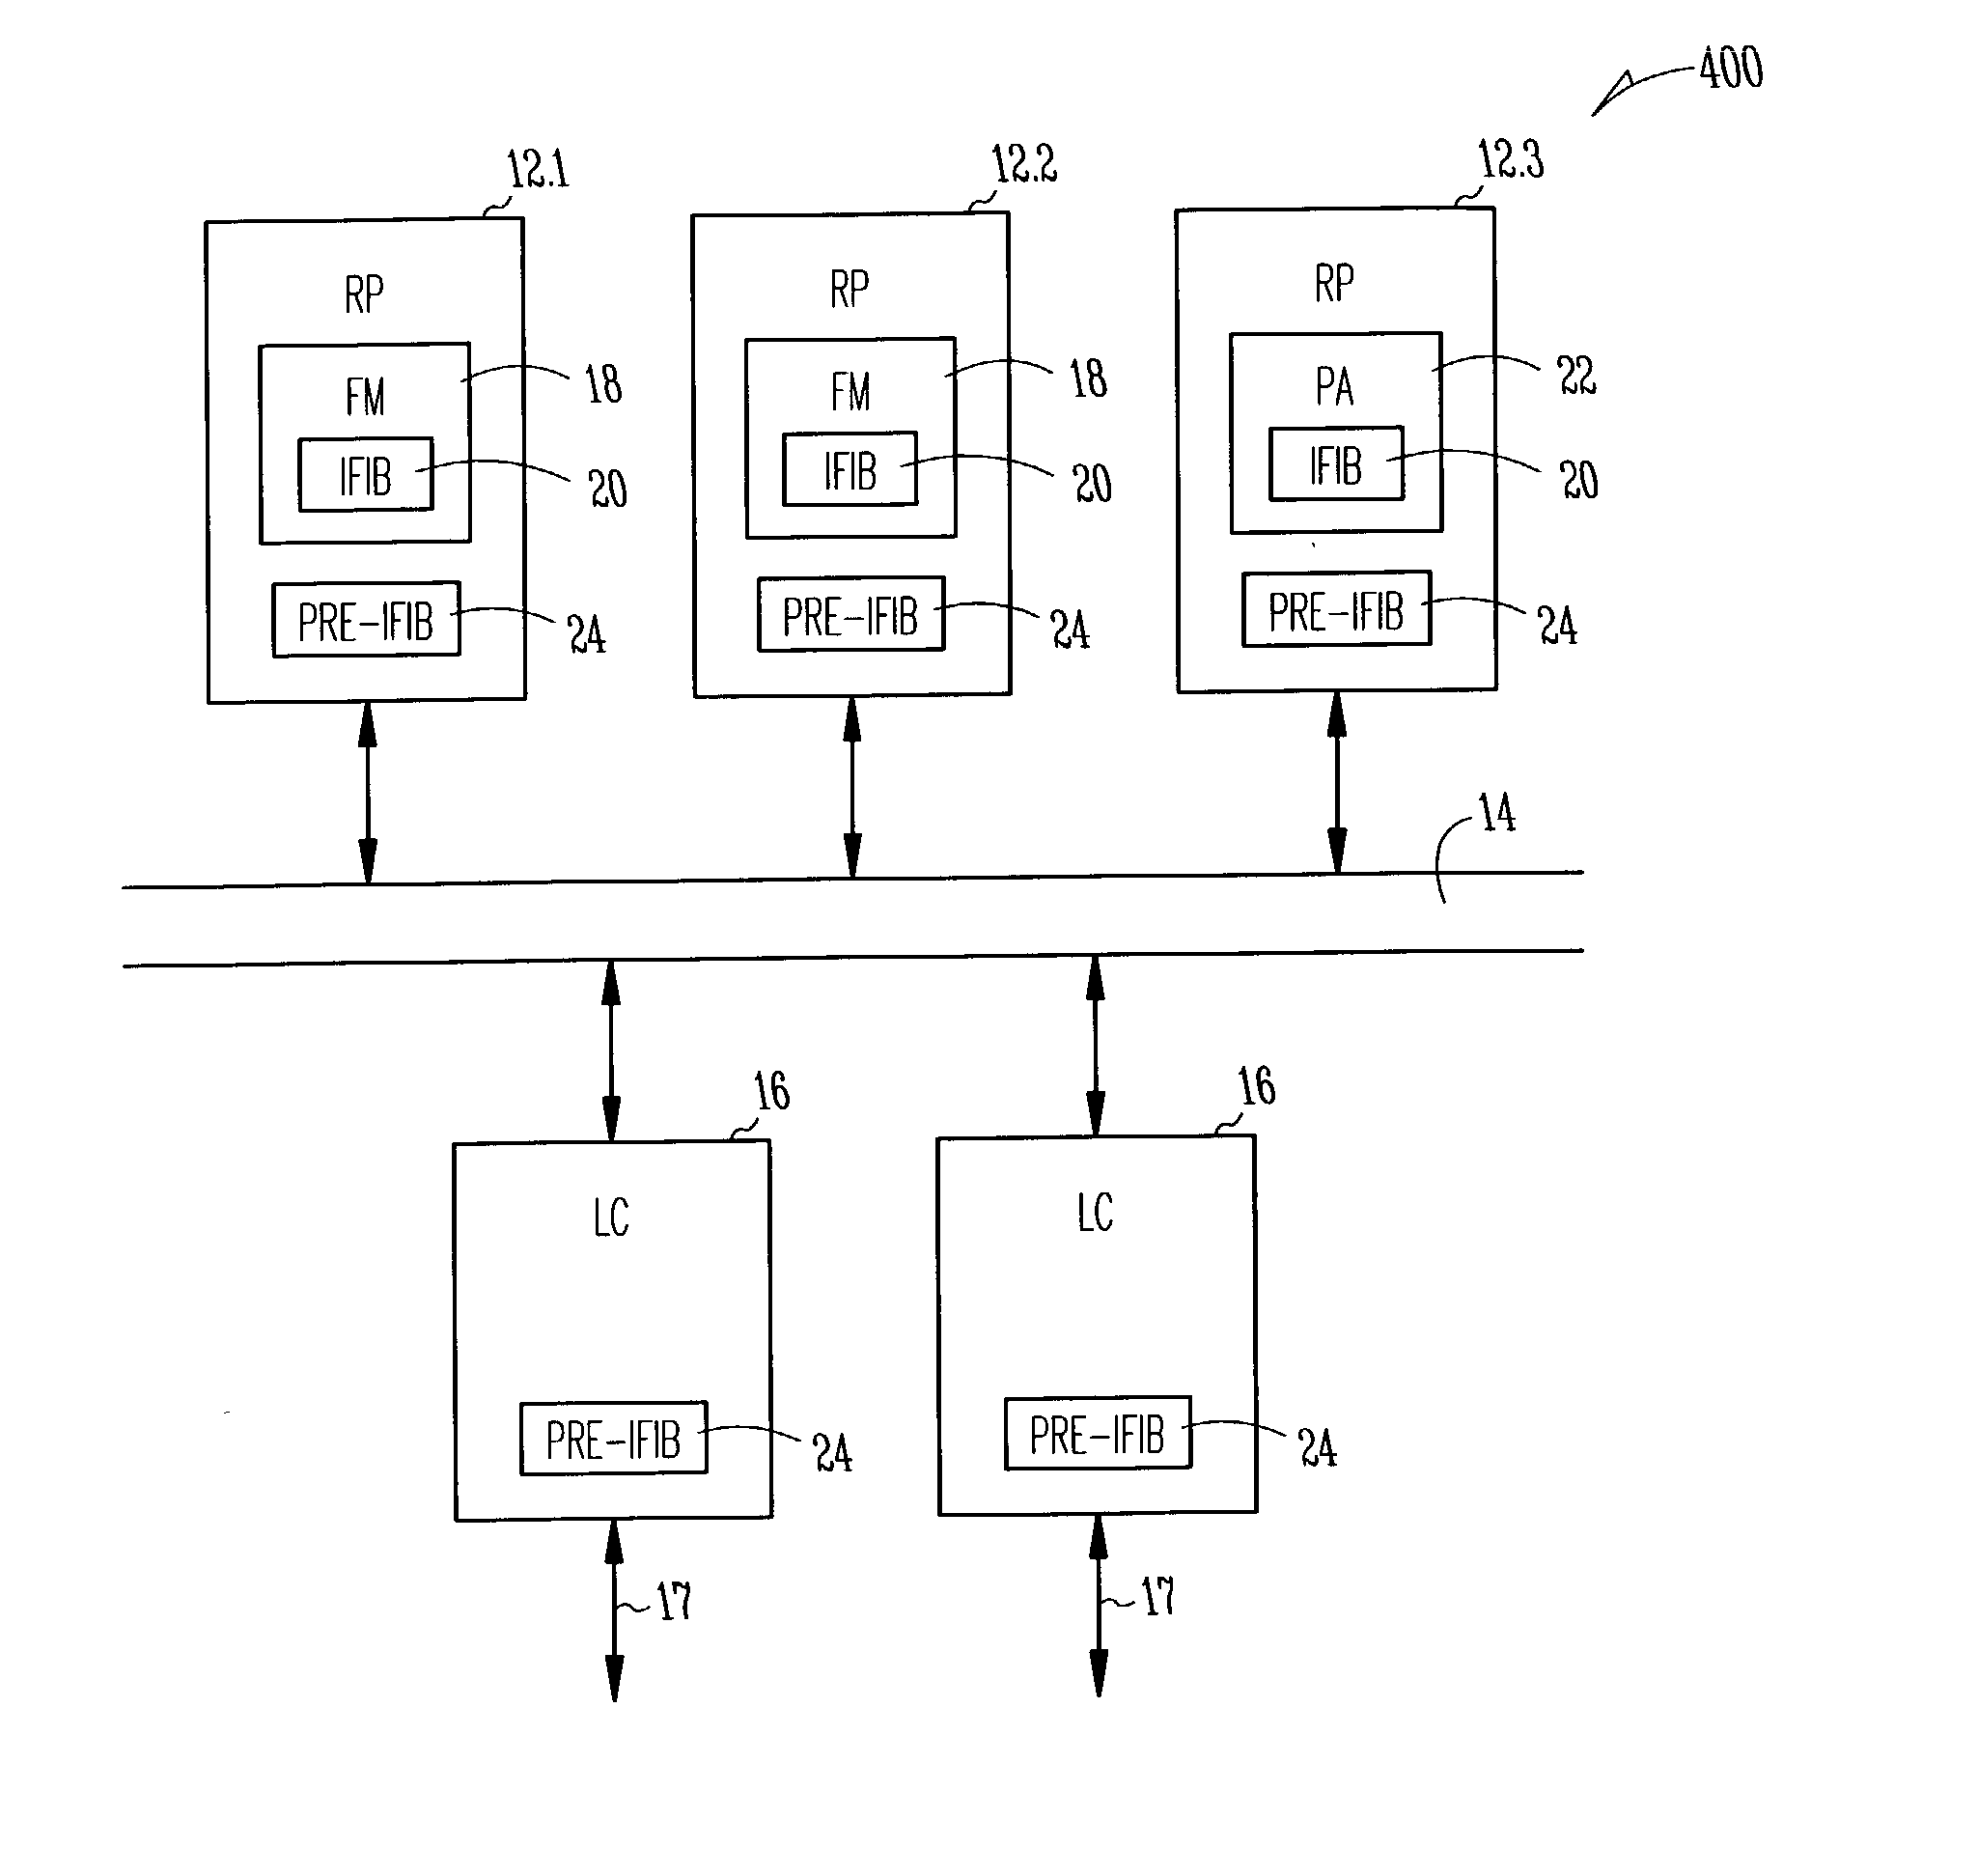 System and method for local packet transport services within distributed routers